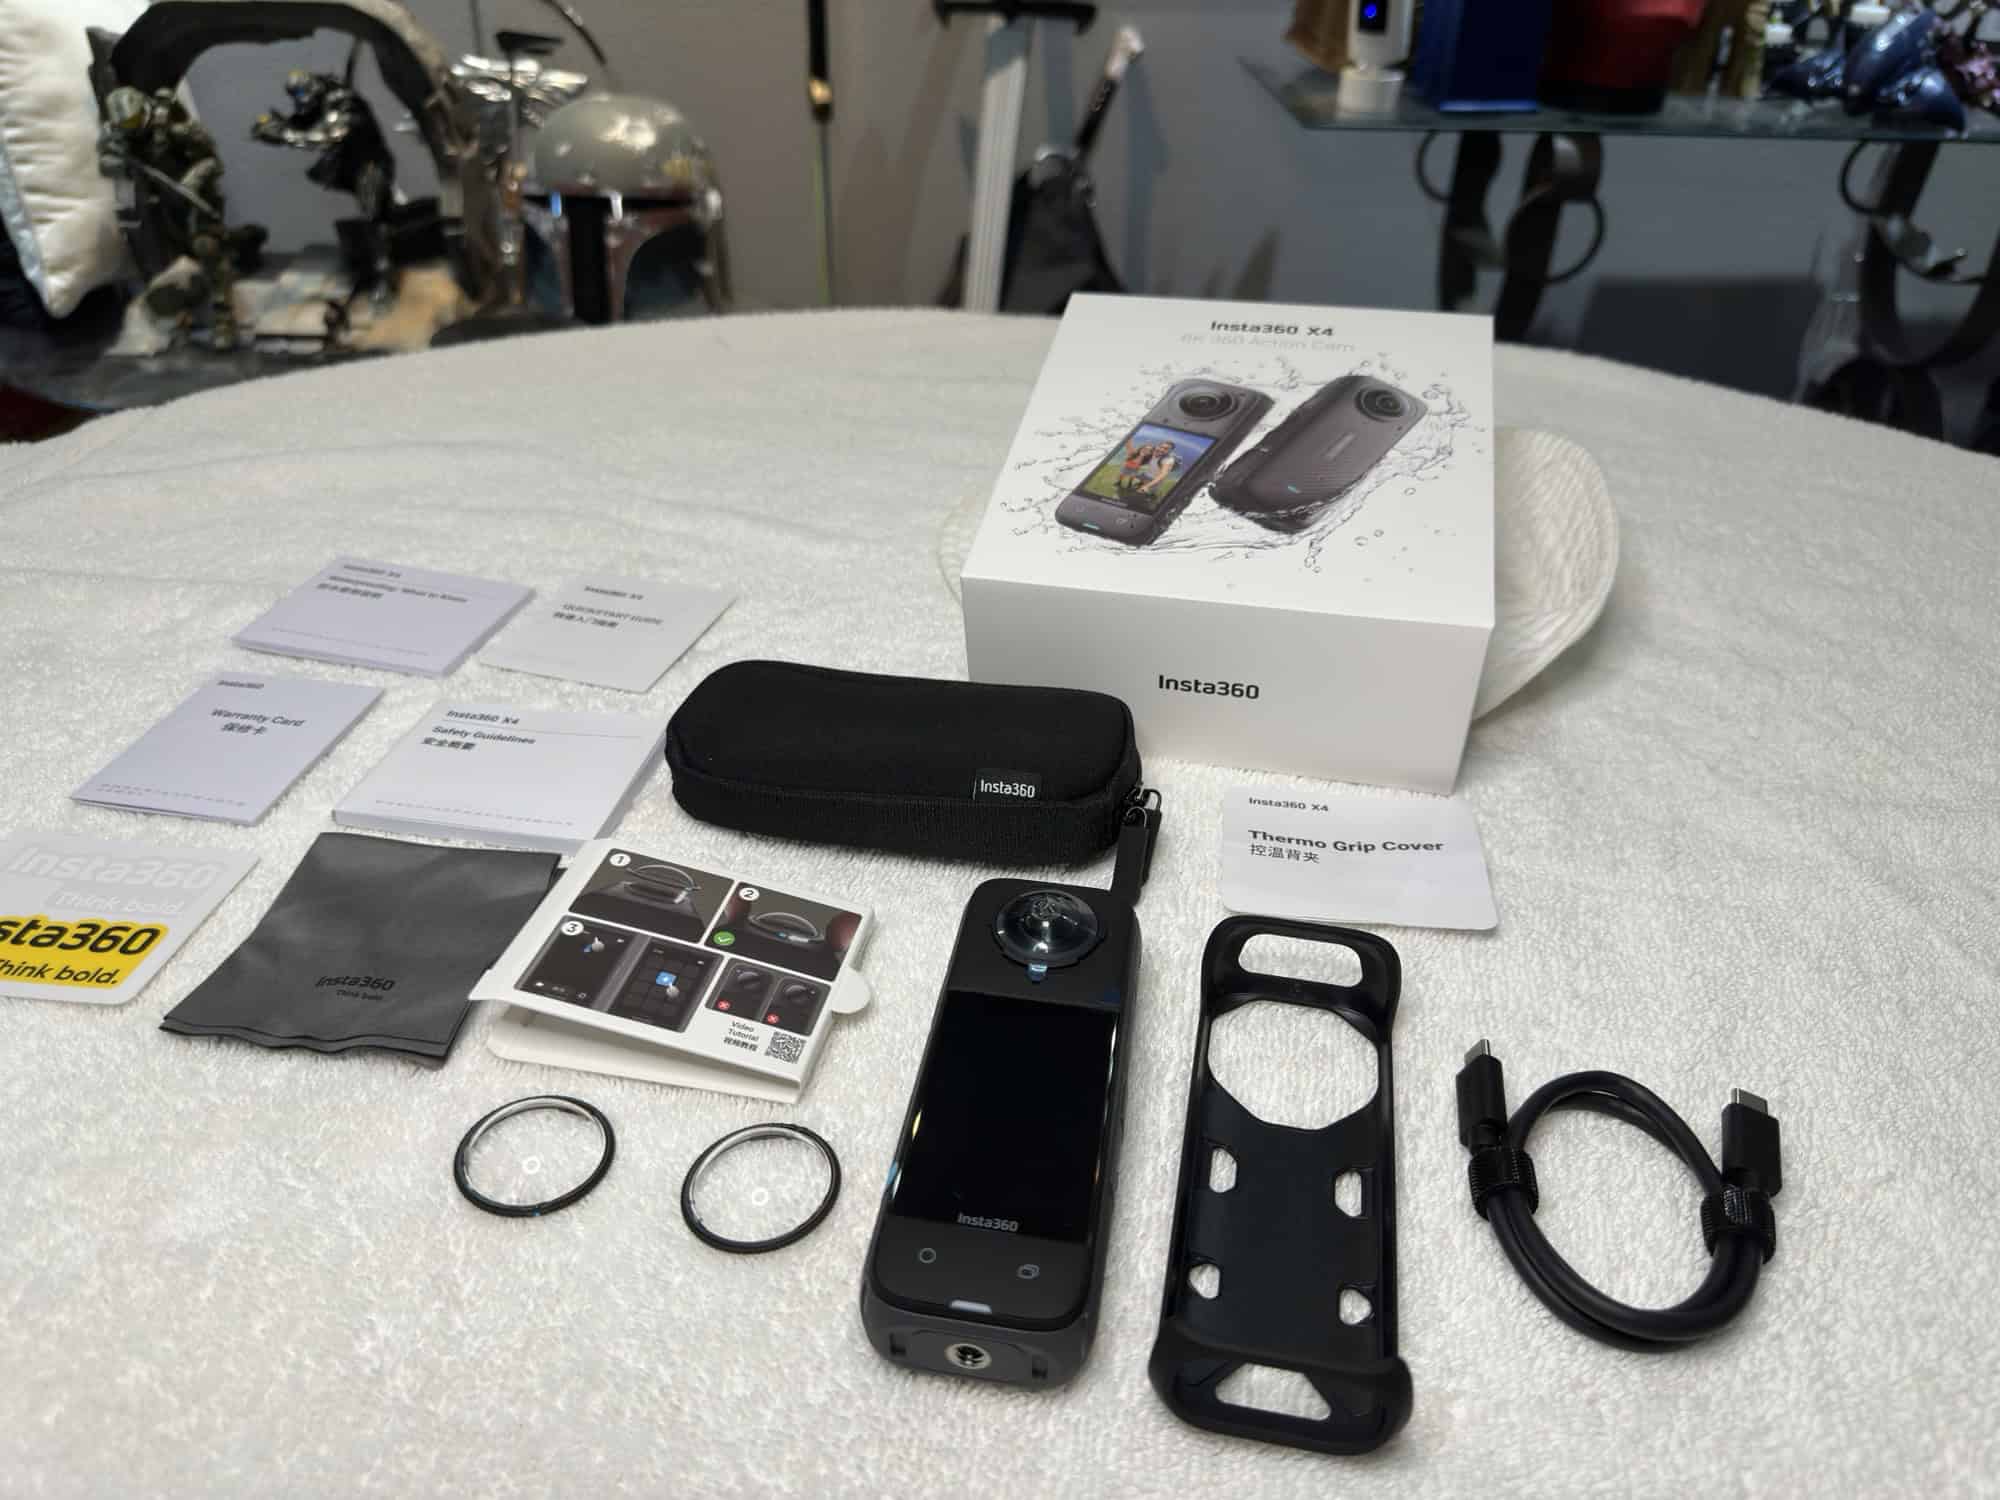 Insta360 X4 unboxed with all the contents laying on table